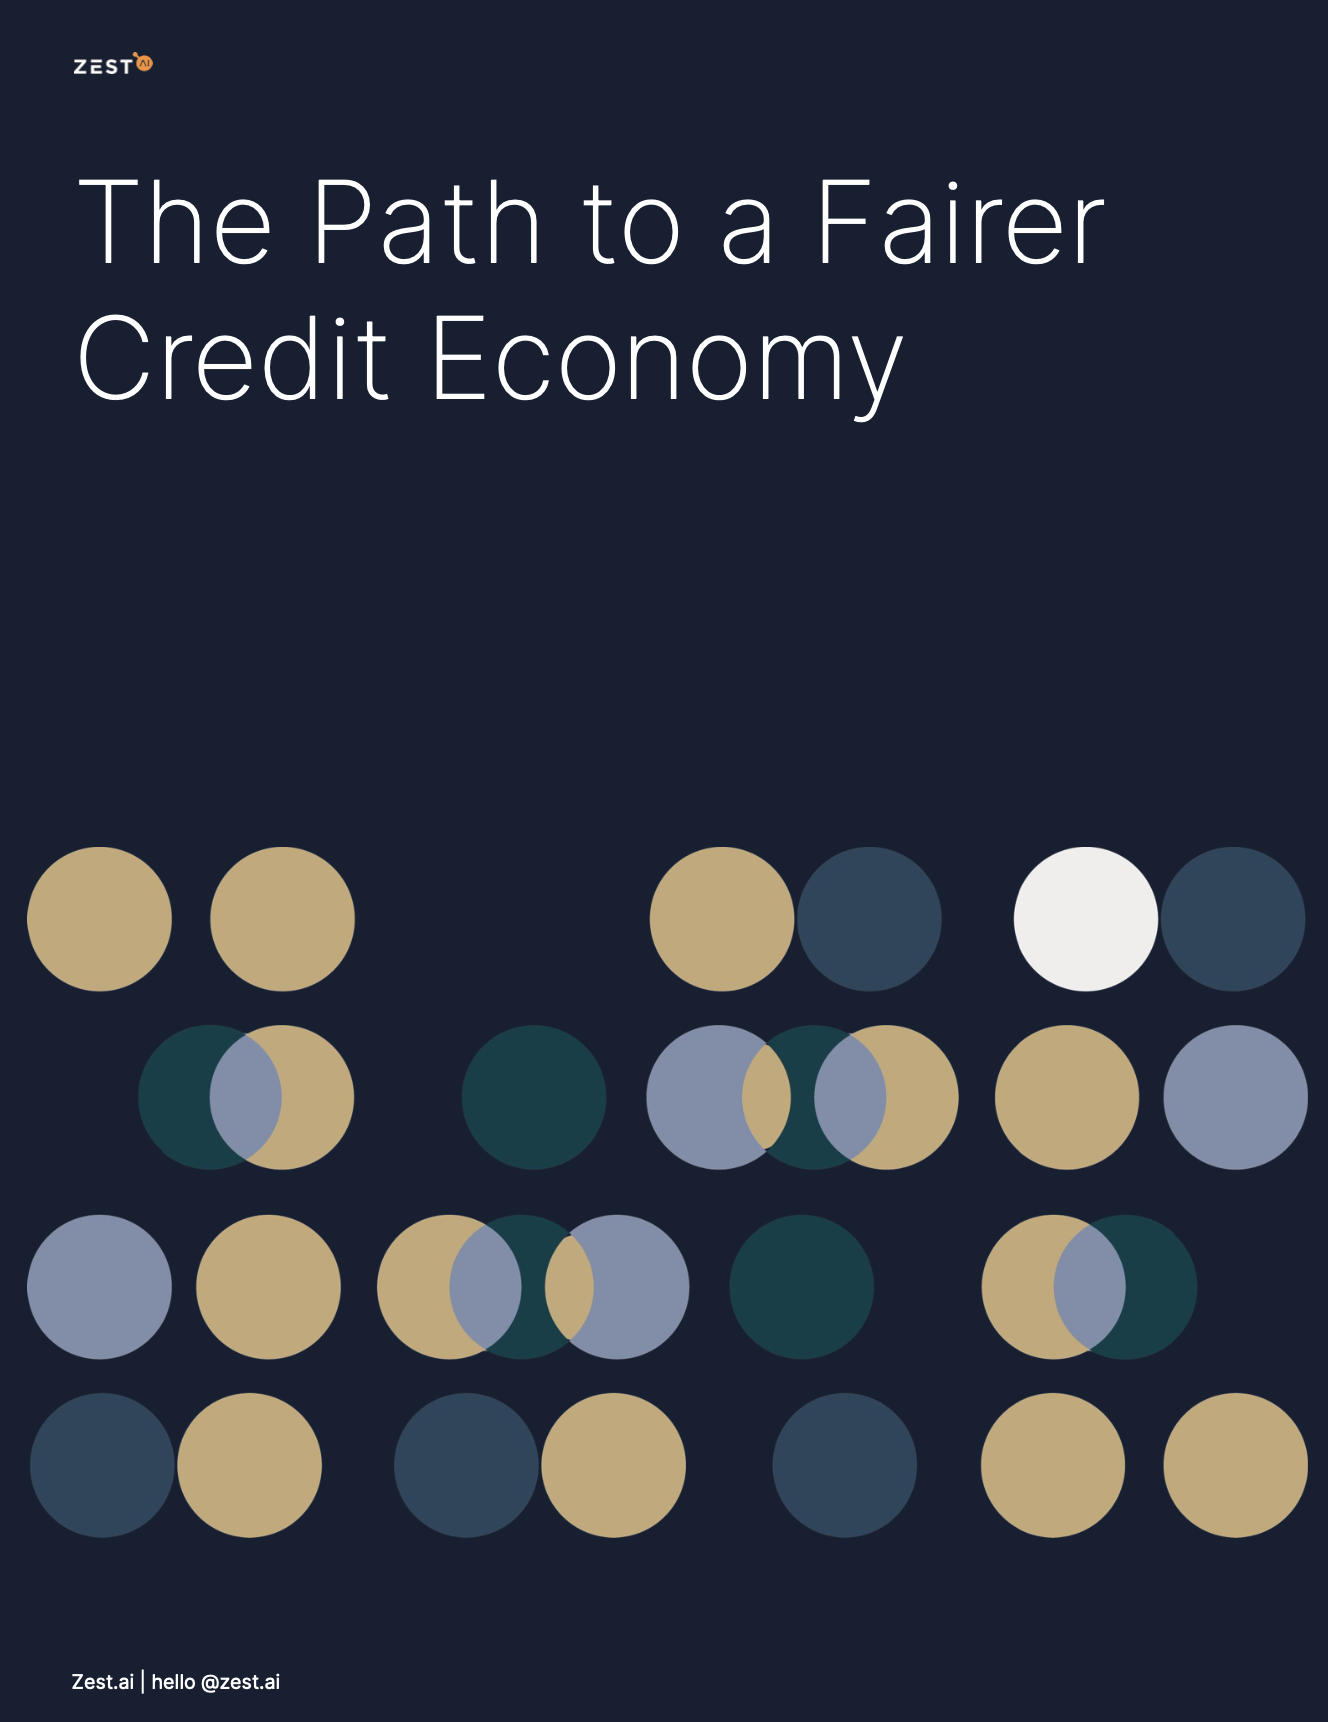 The Path to a Fairer Credit Economy